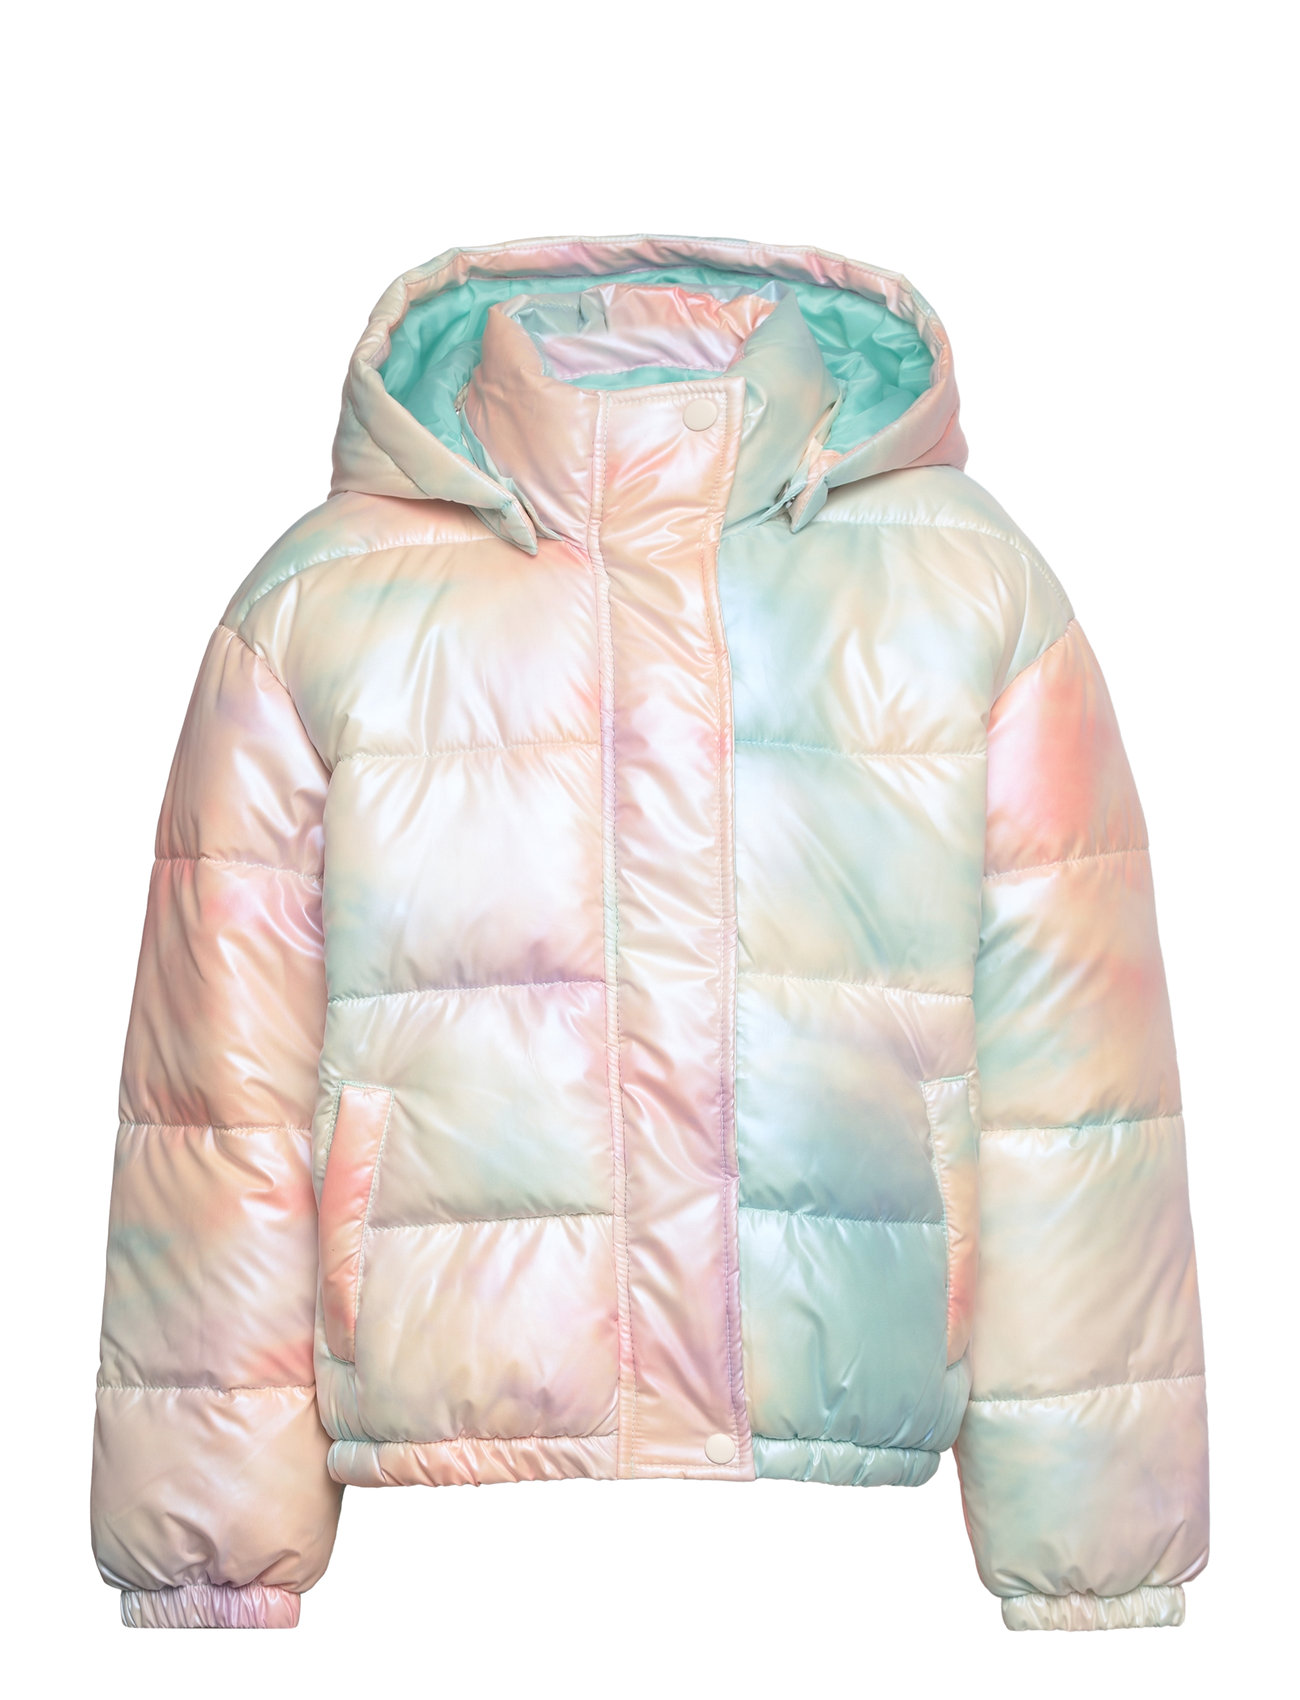 Fast Padded it Nkfmash at Boozt.com. returns name Puffer online delivery Buy €. it name 31.50 Puffer and Jacket easy from - &